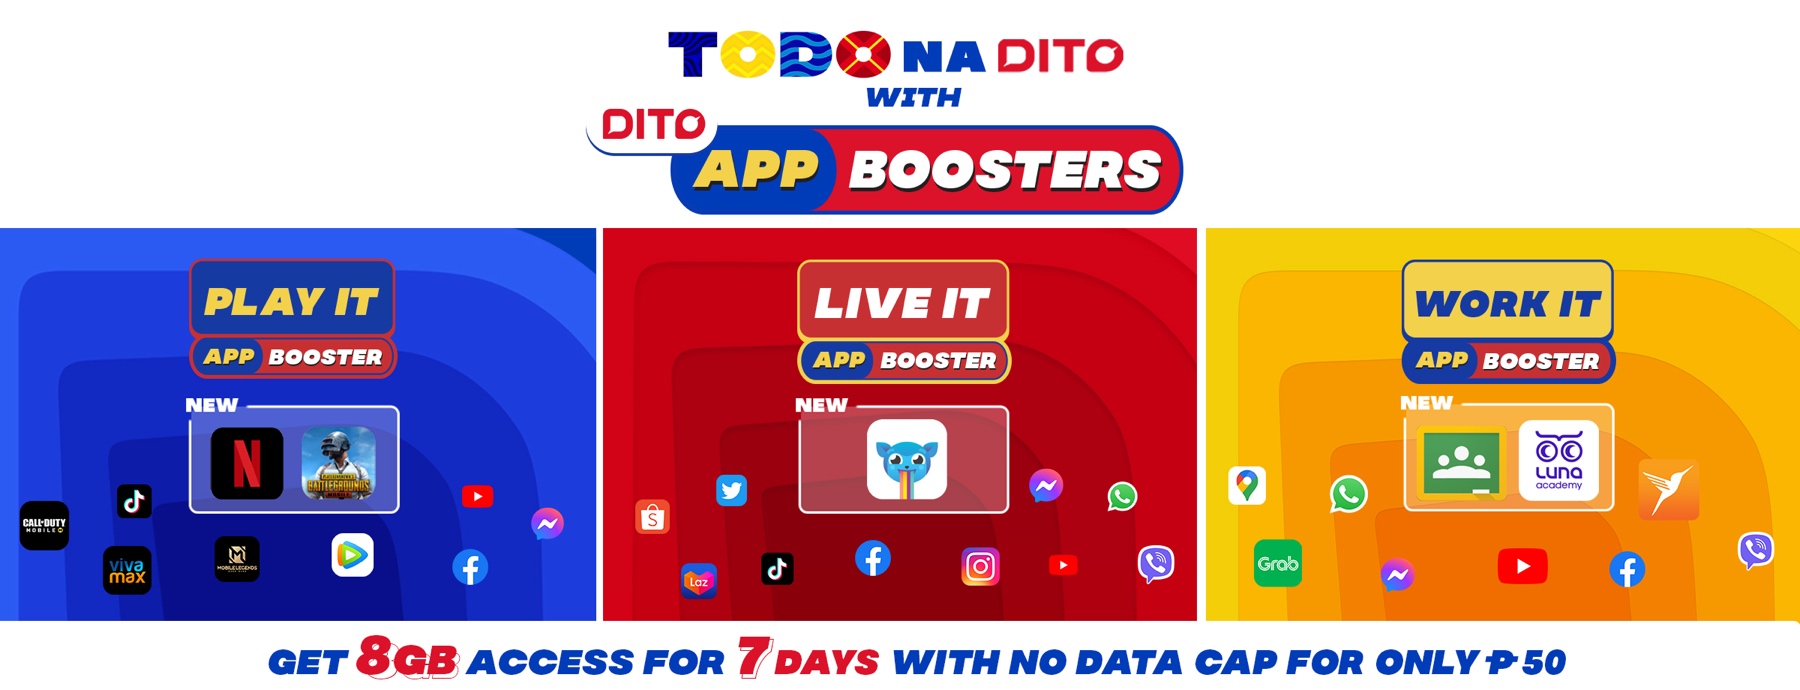 DITO SIM Promos: App Boosters Pack